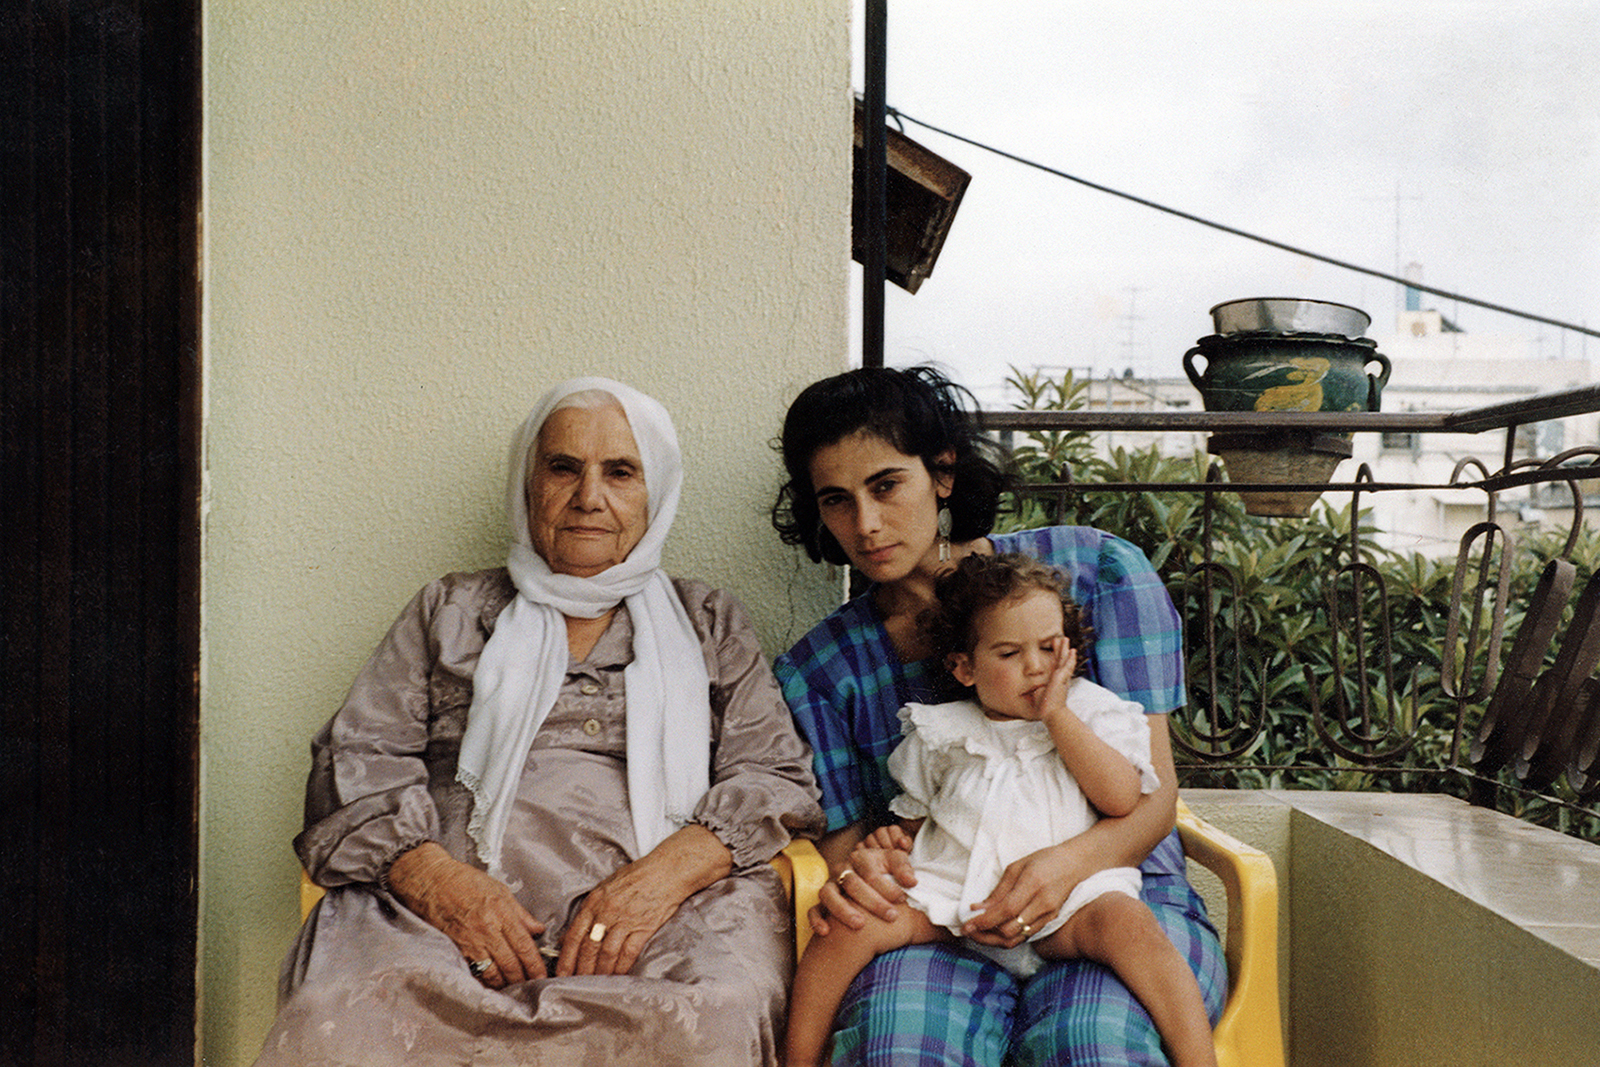 Lina Soualem as a baby with her grandmother and mother Hiam Abbass on a balcony in the 1990s. Photo courtesy of Lina Soualem.